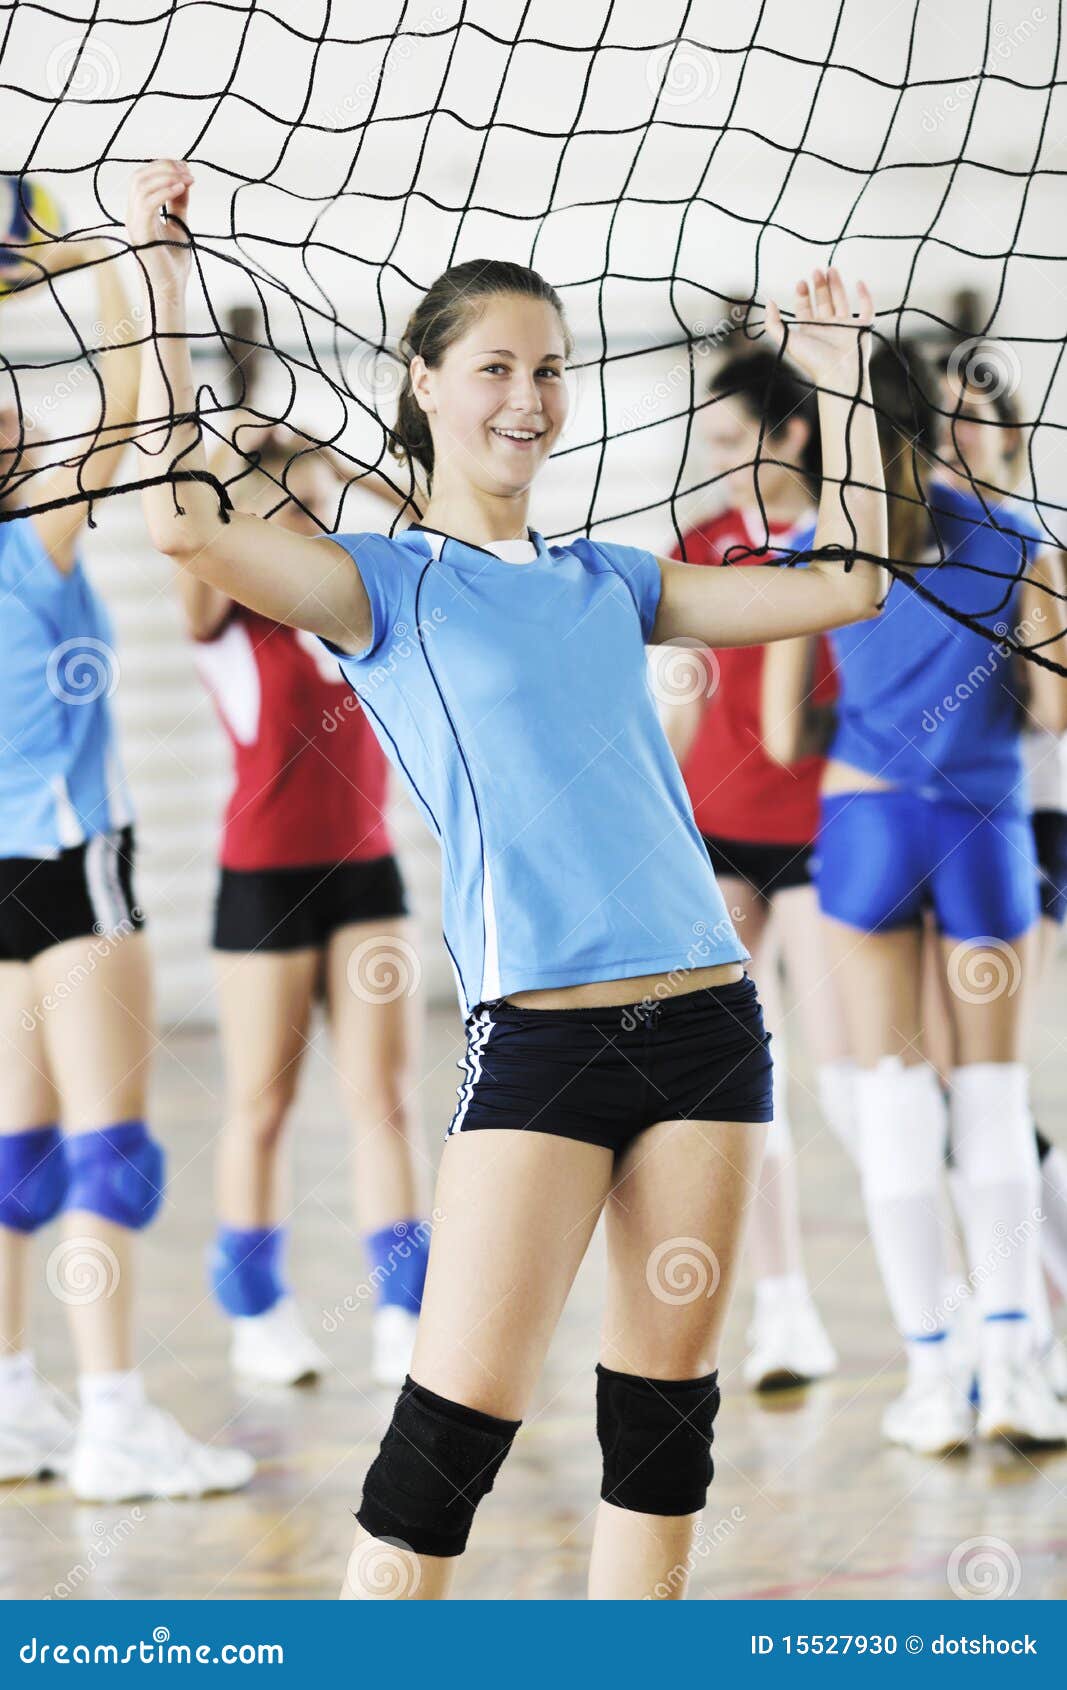 Girls playing volleyball indoor game — Stock Photo 